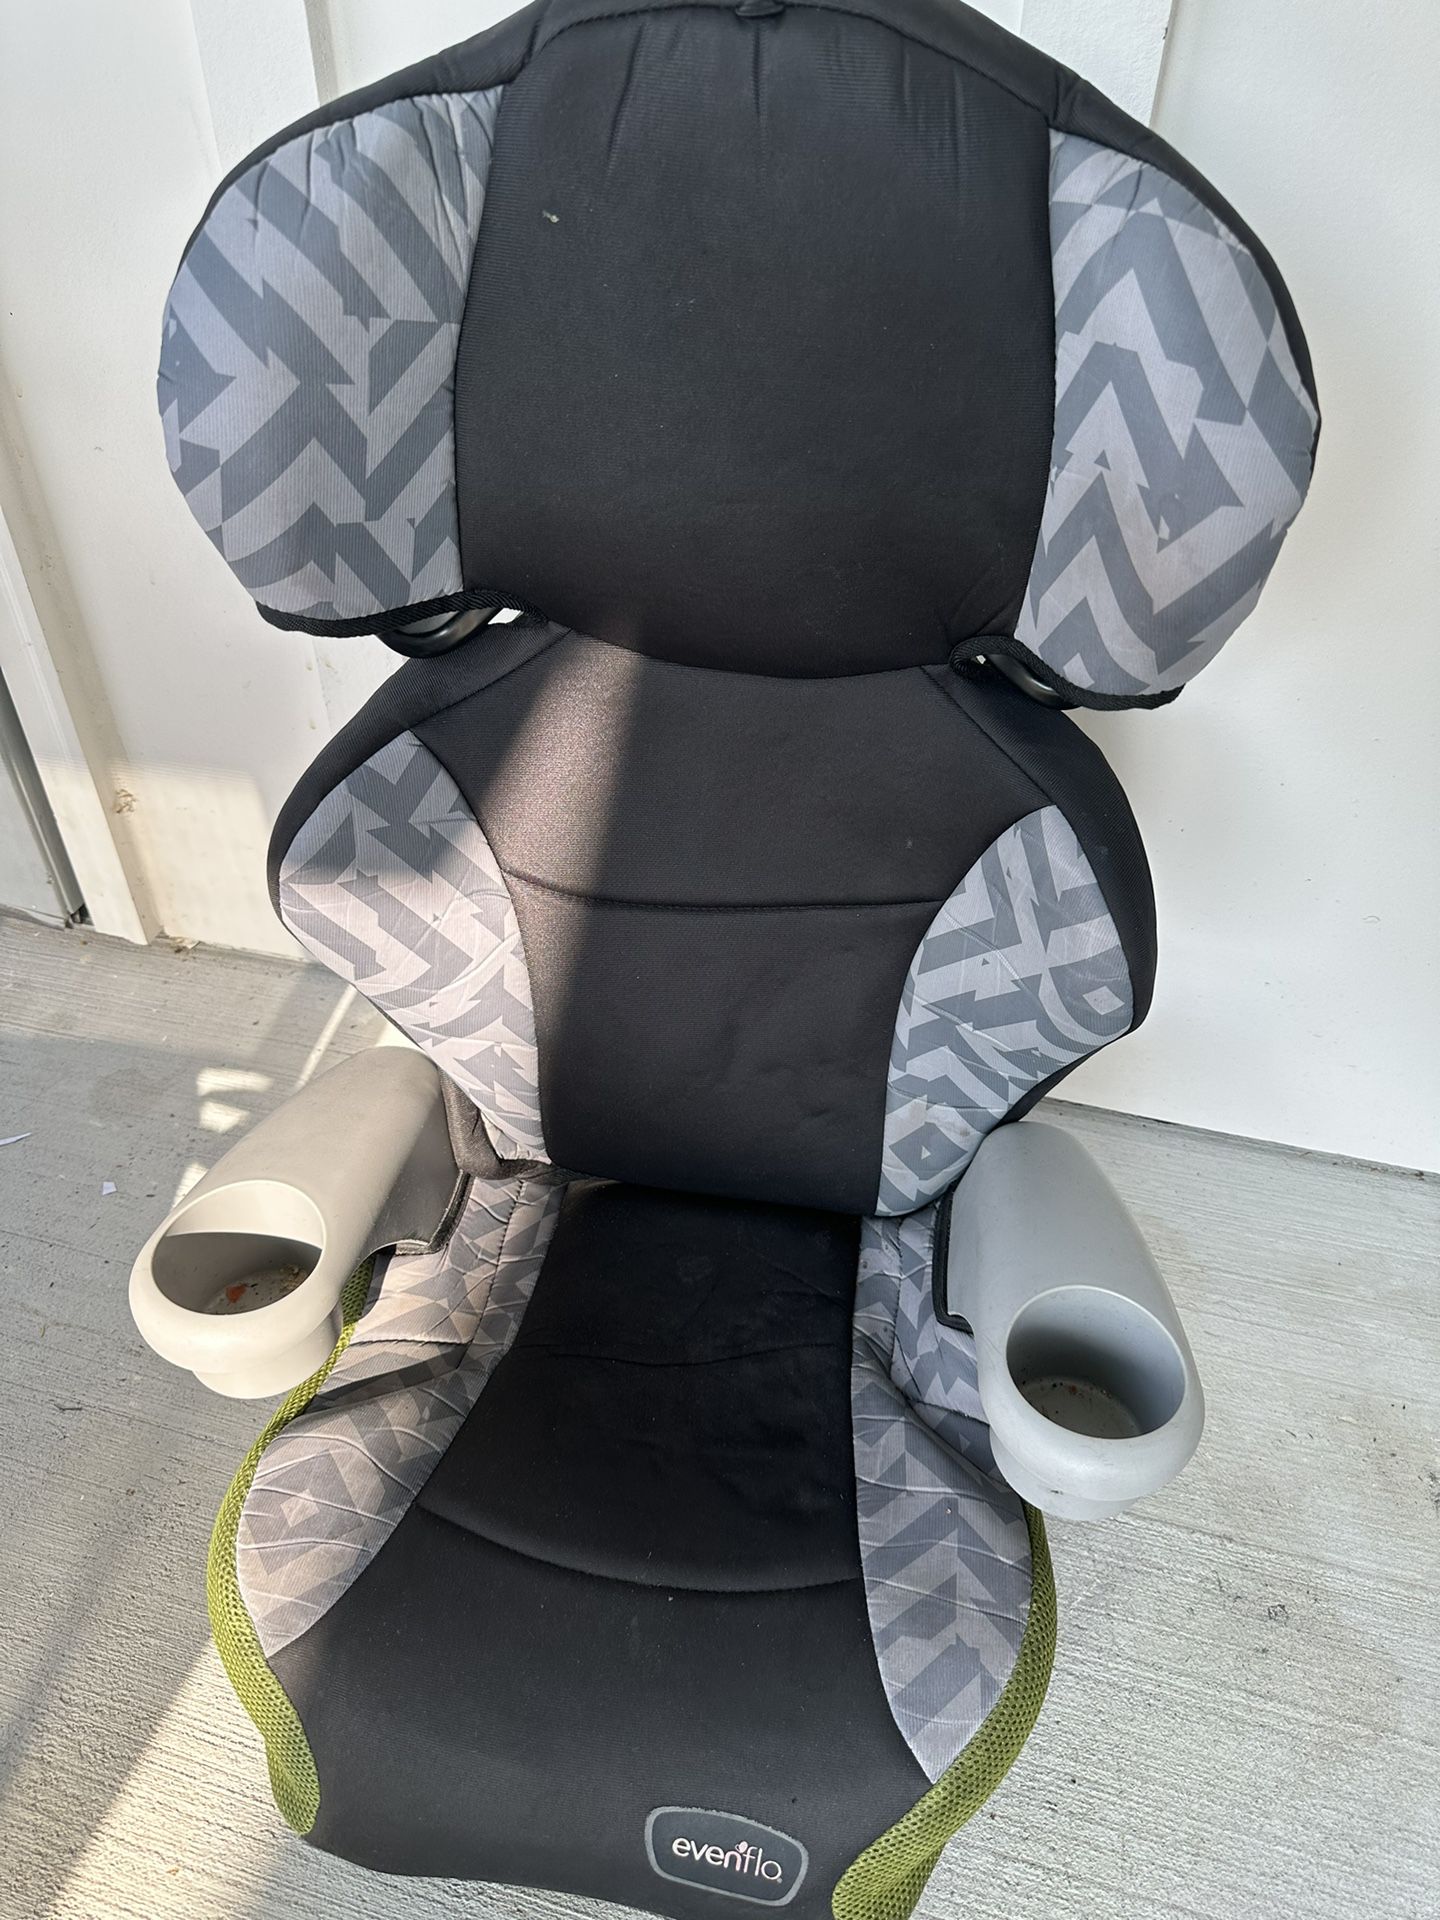 Evenflo Booster seat